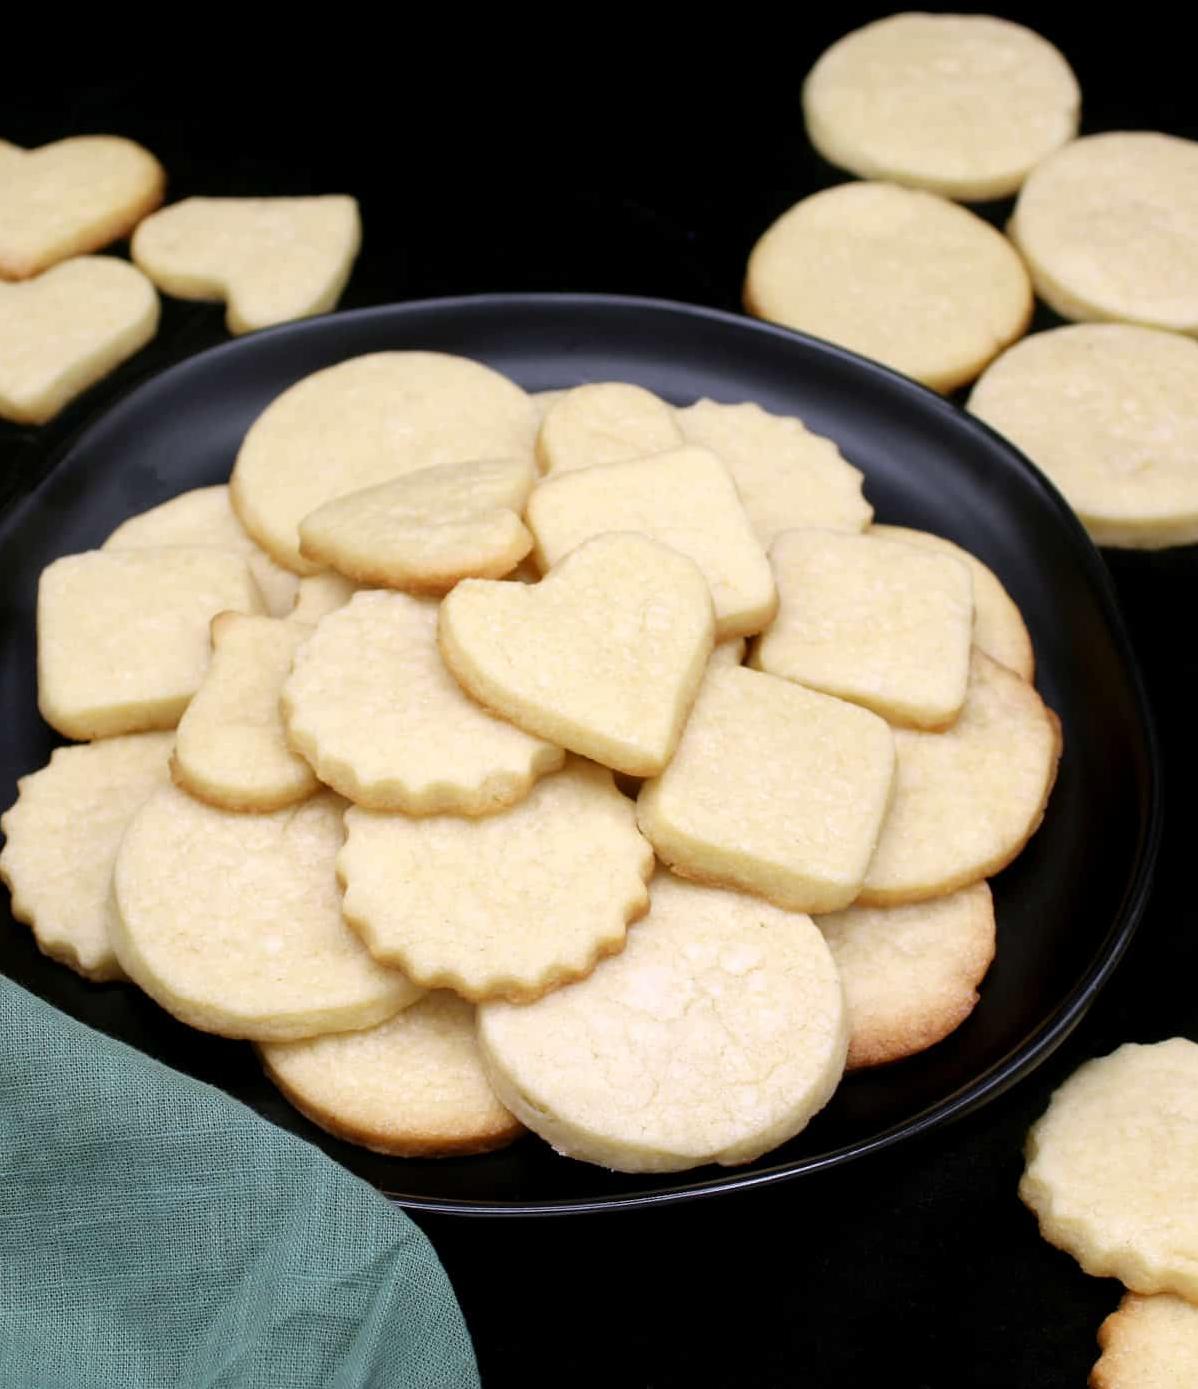  The perfect cookies for Valentine's day, birthdays, or any day.